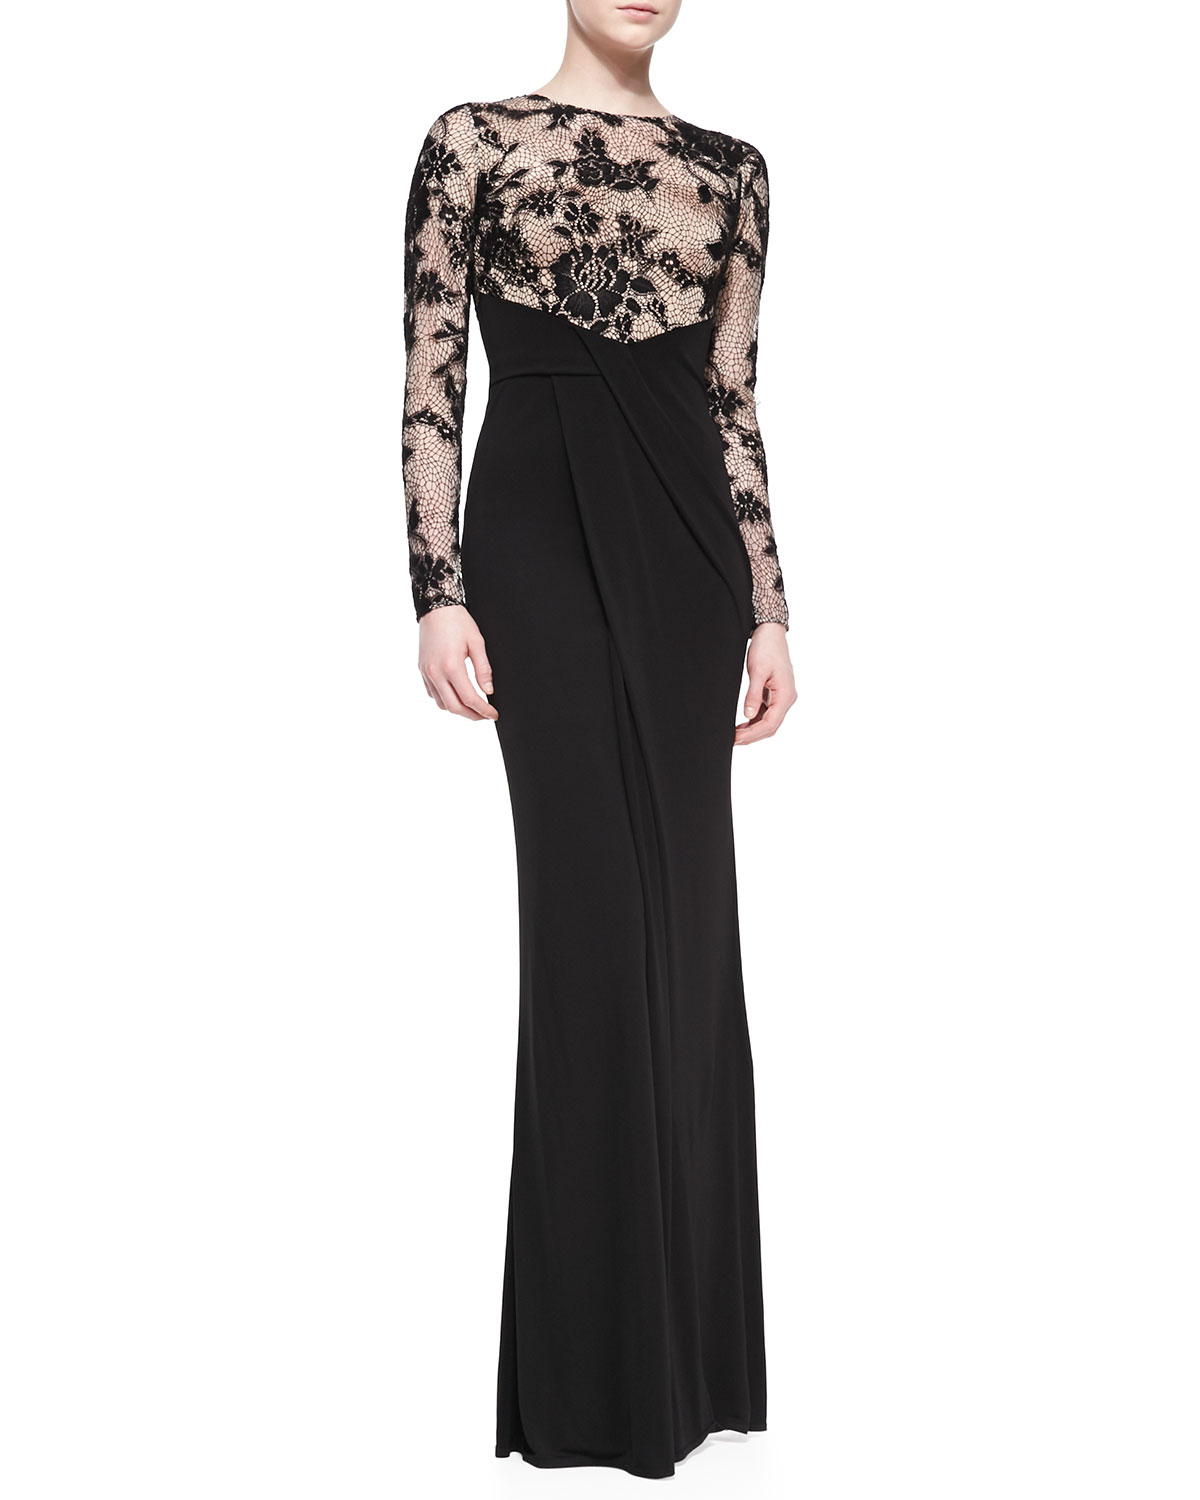 Lyst - David Meister Long-Sleeve Illusion Lace Gown in Black